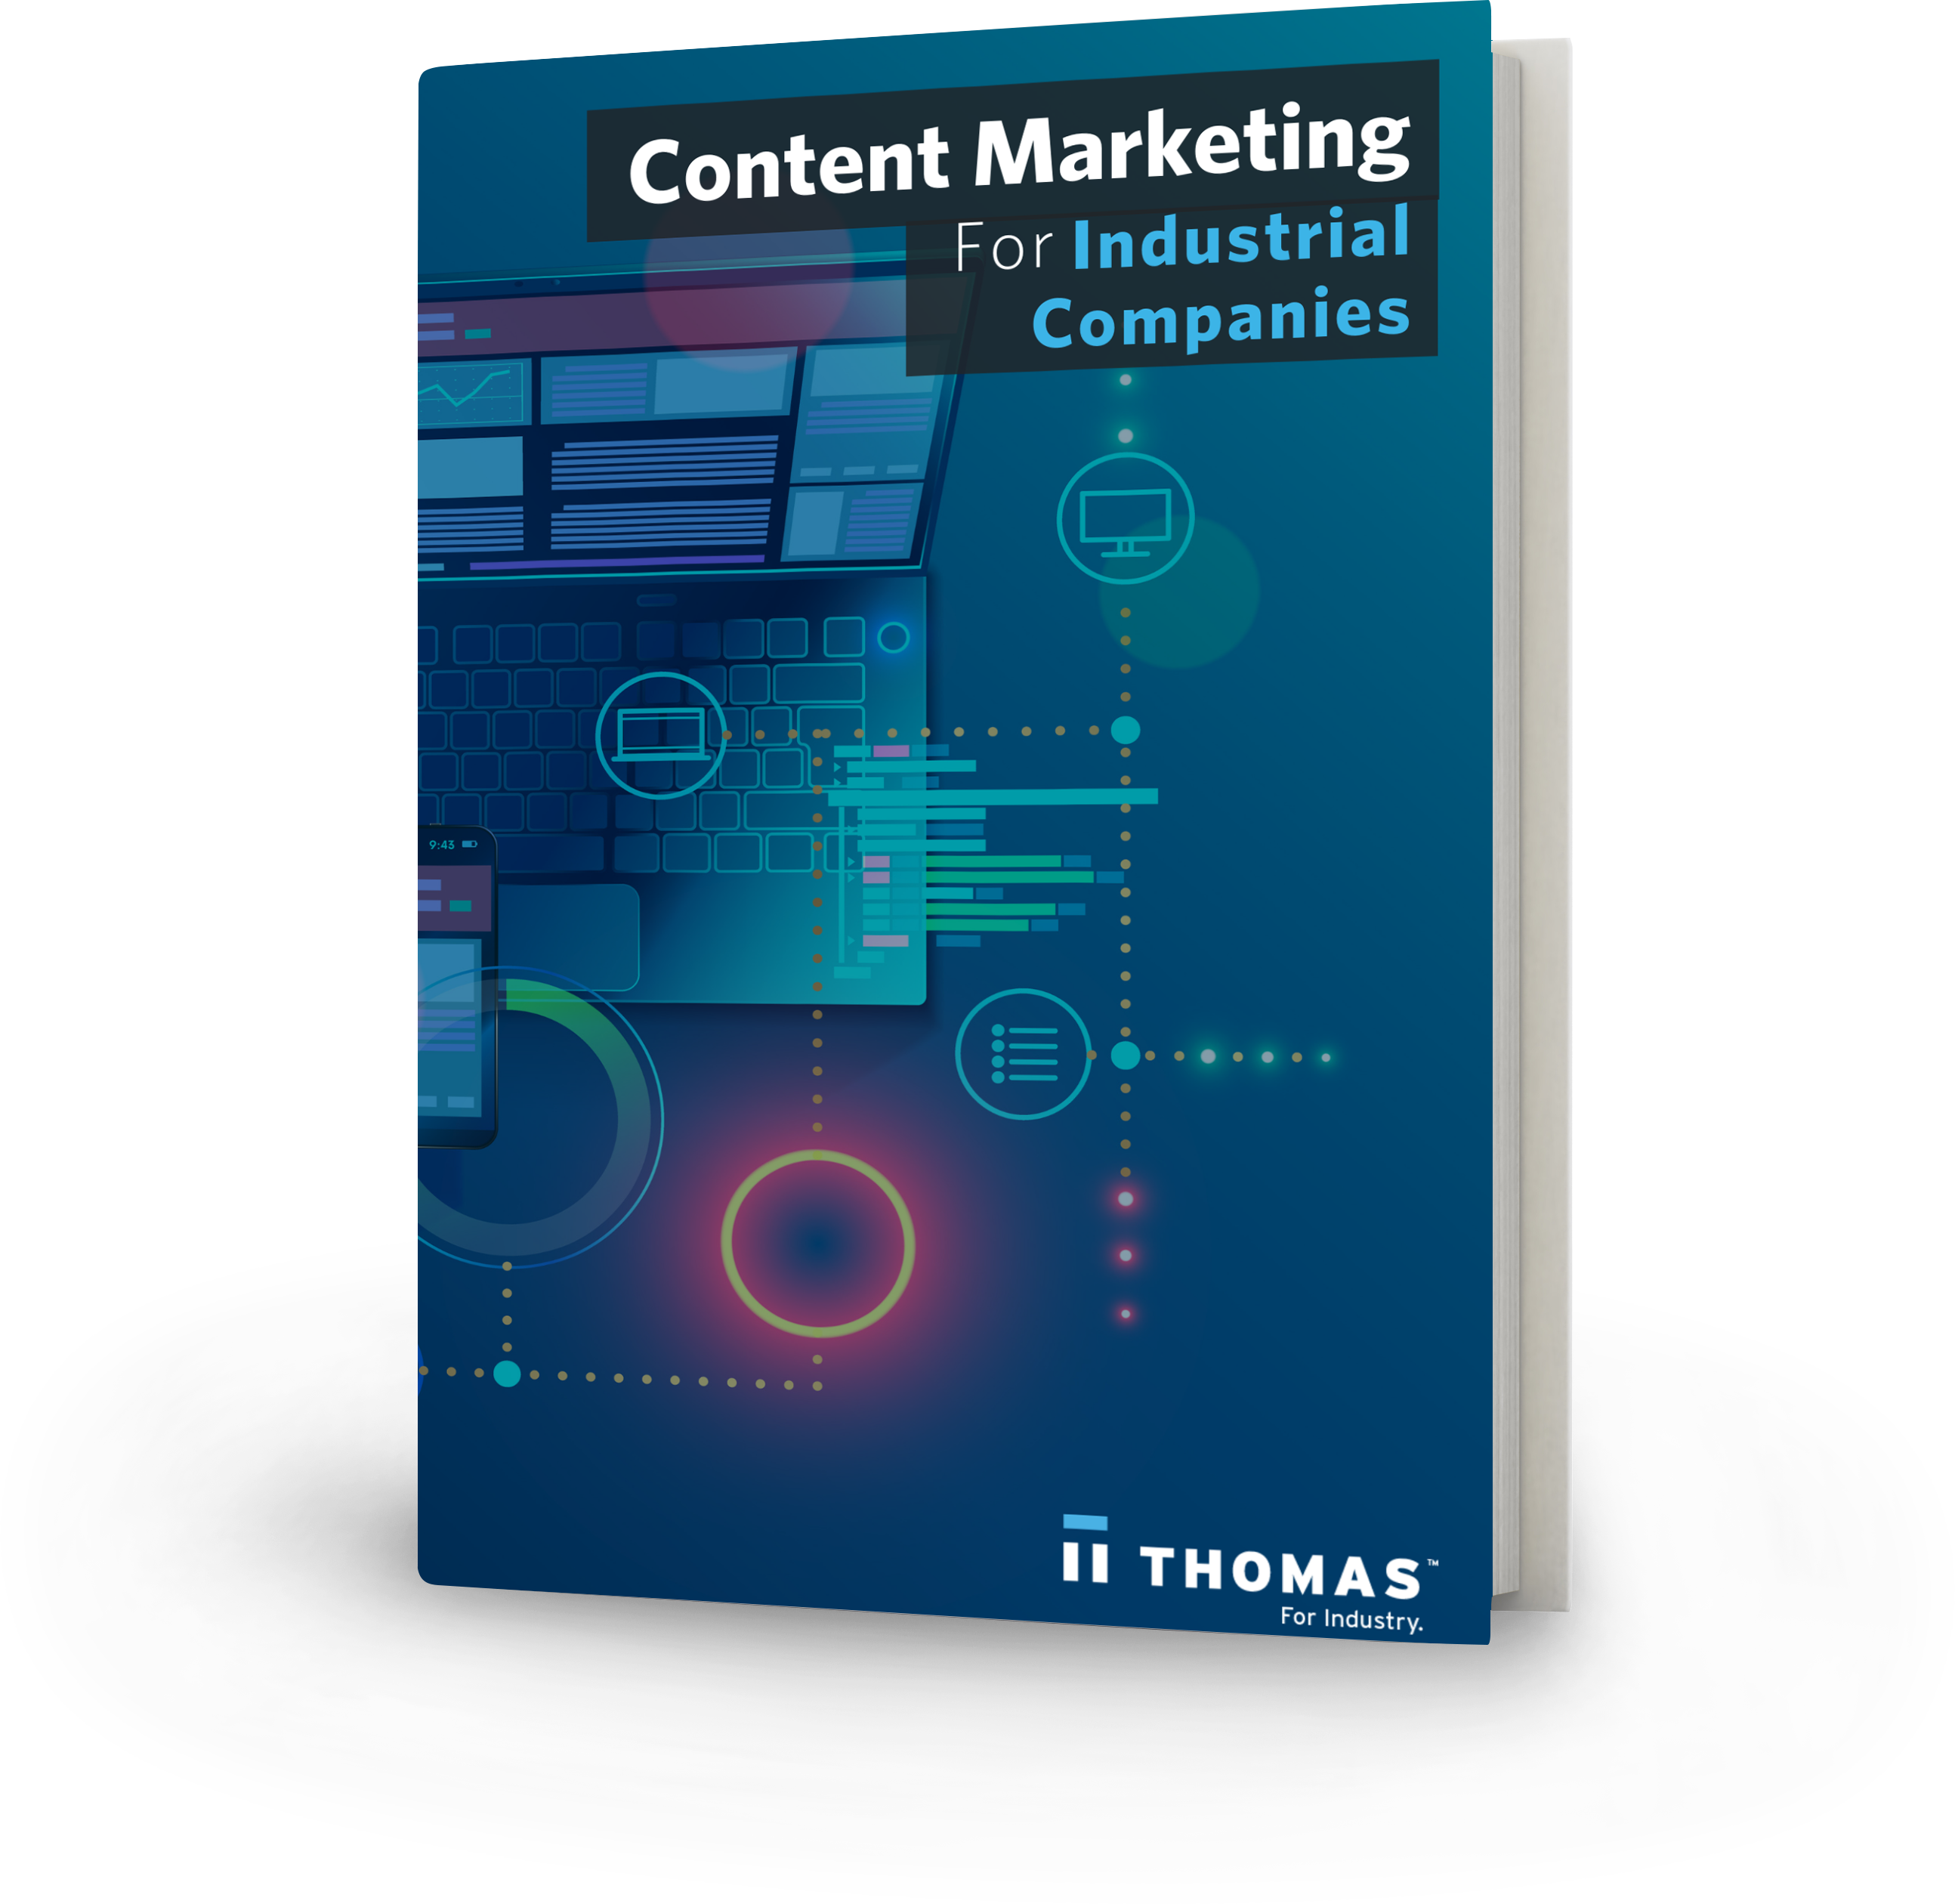 Content Marketing For Industrial Companies